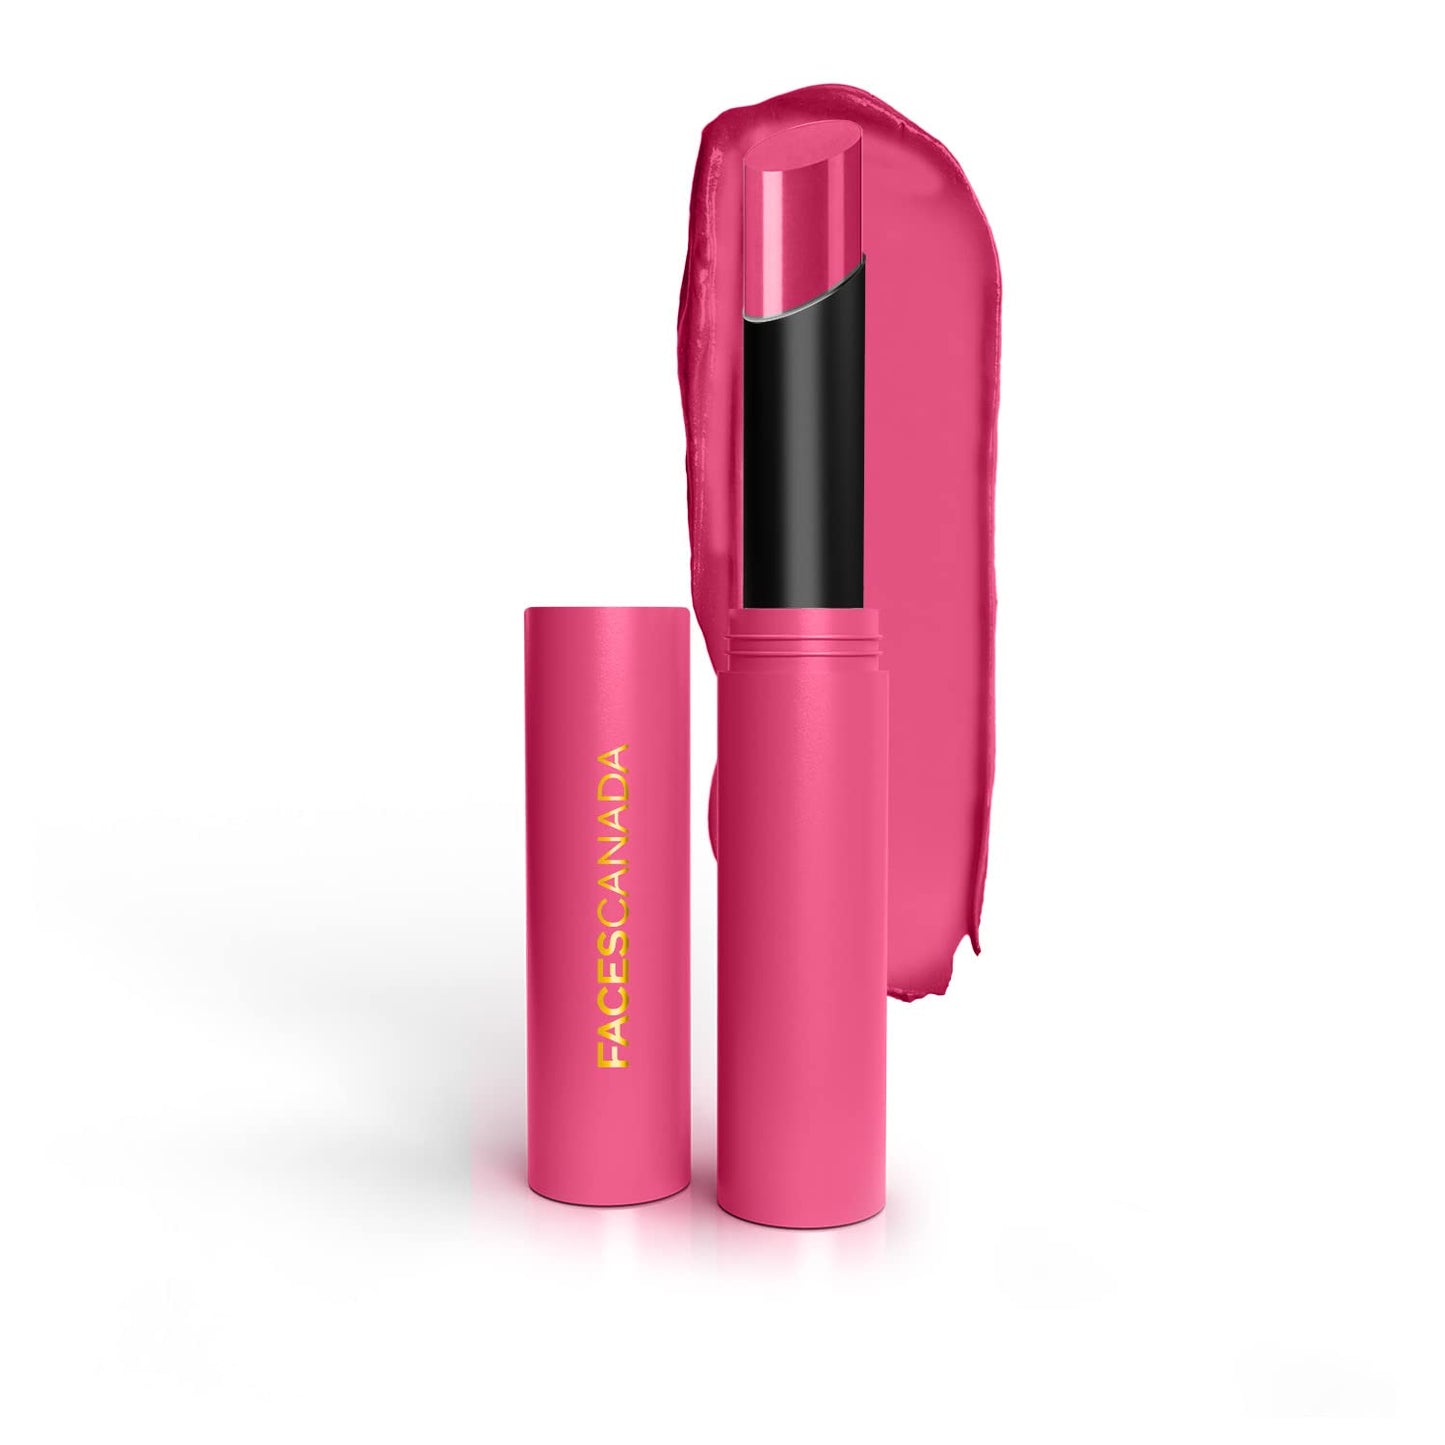 FACESCANADA Long Stay 3-in-1 Matte Lipstick - Bubblegum Pink 04, 2g | 8HR Longstay | Transfer Proof | Moisturizing | Chamomile & Shea Butter | Primer-Infused | Lightweight | Intense Color Payoff